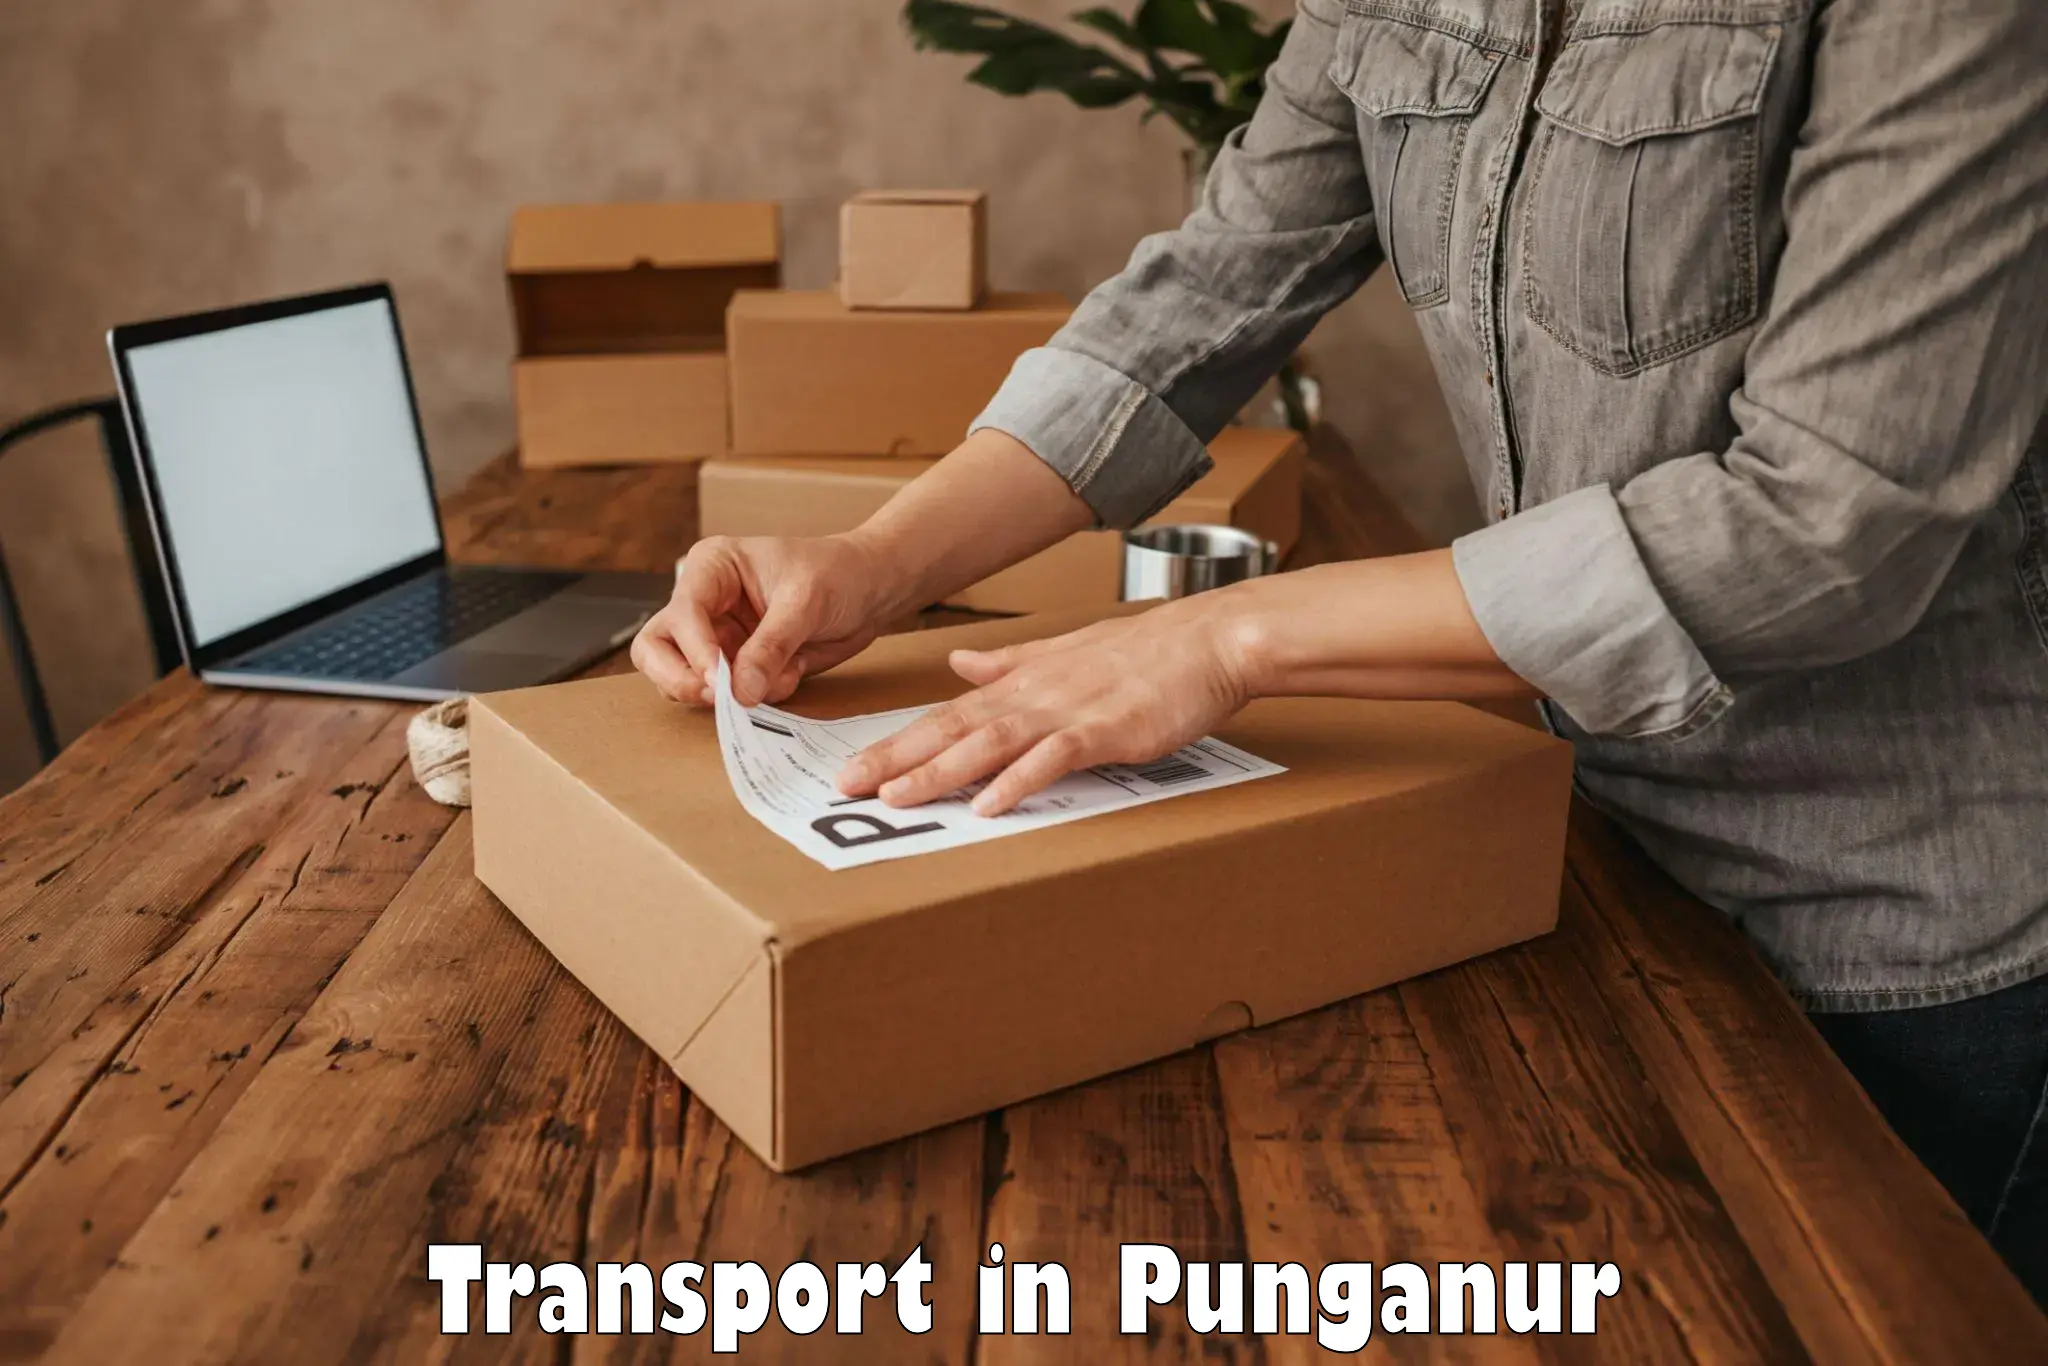 Daily parcel service transport in Punganur